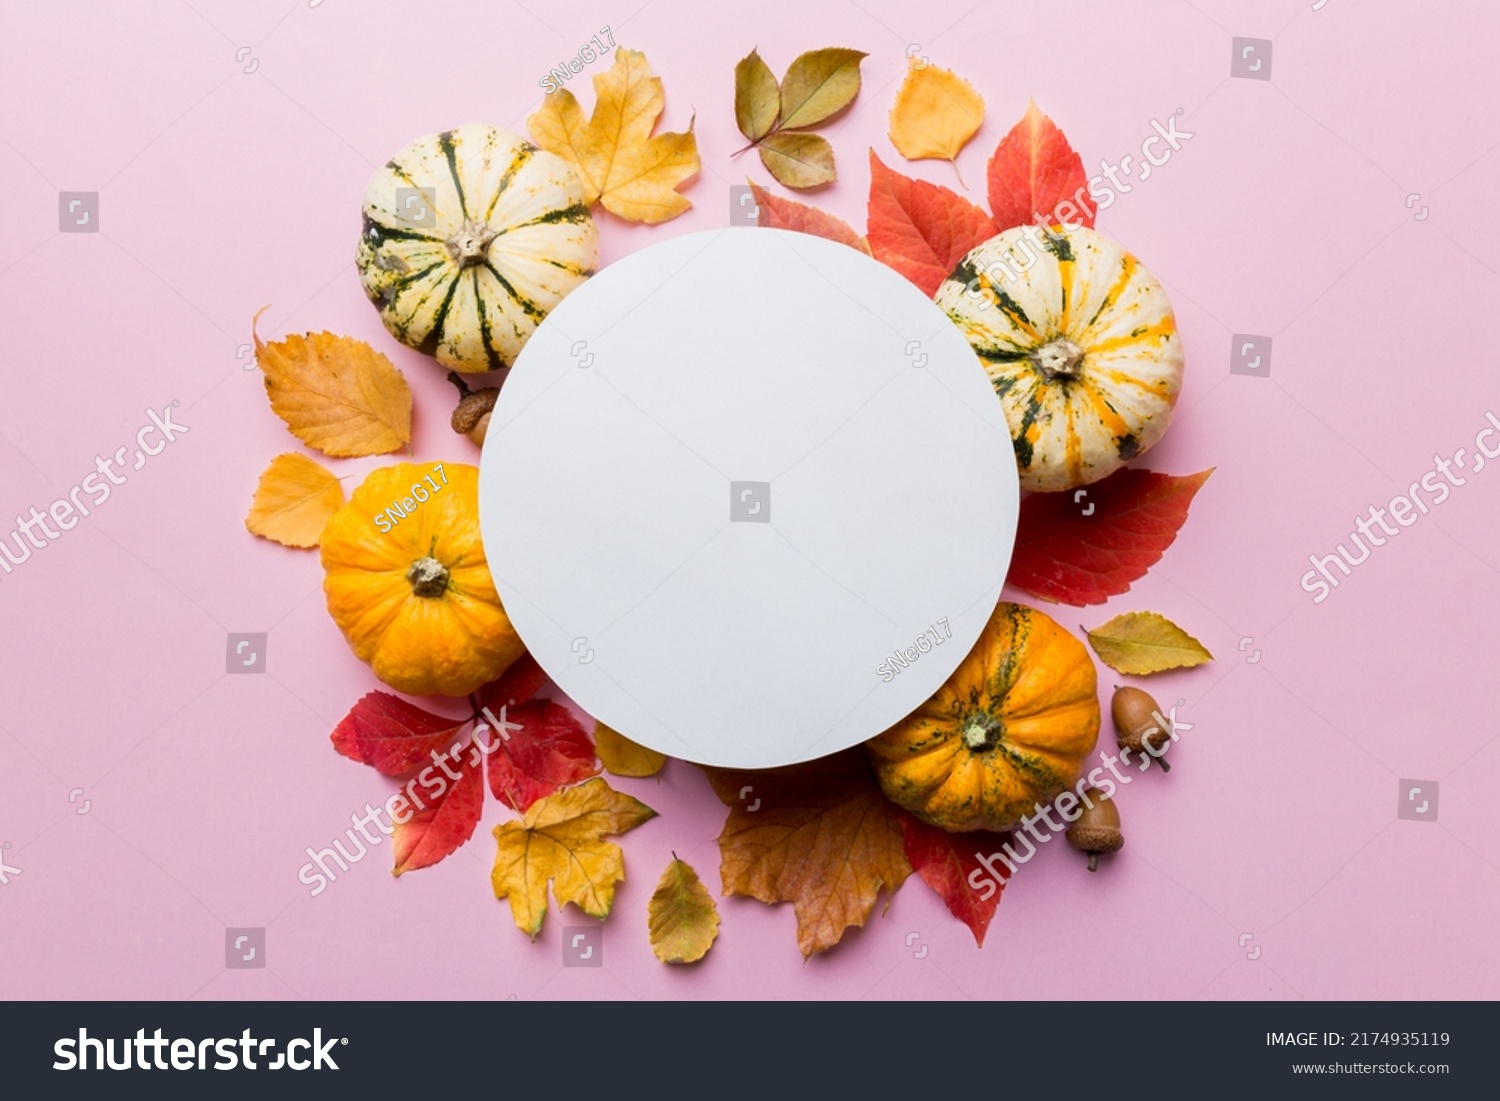 Autumn composition with round paper blank and dried leaves with pumpkin on table. Flat lay, top view, copy space. #2174935119